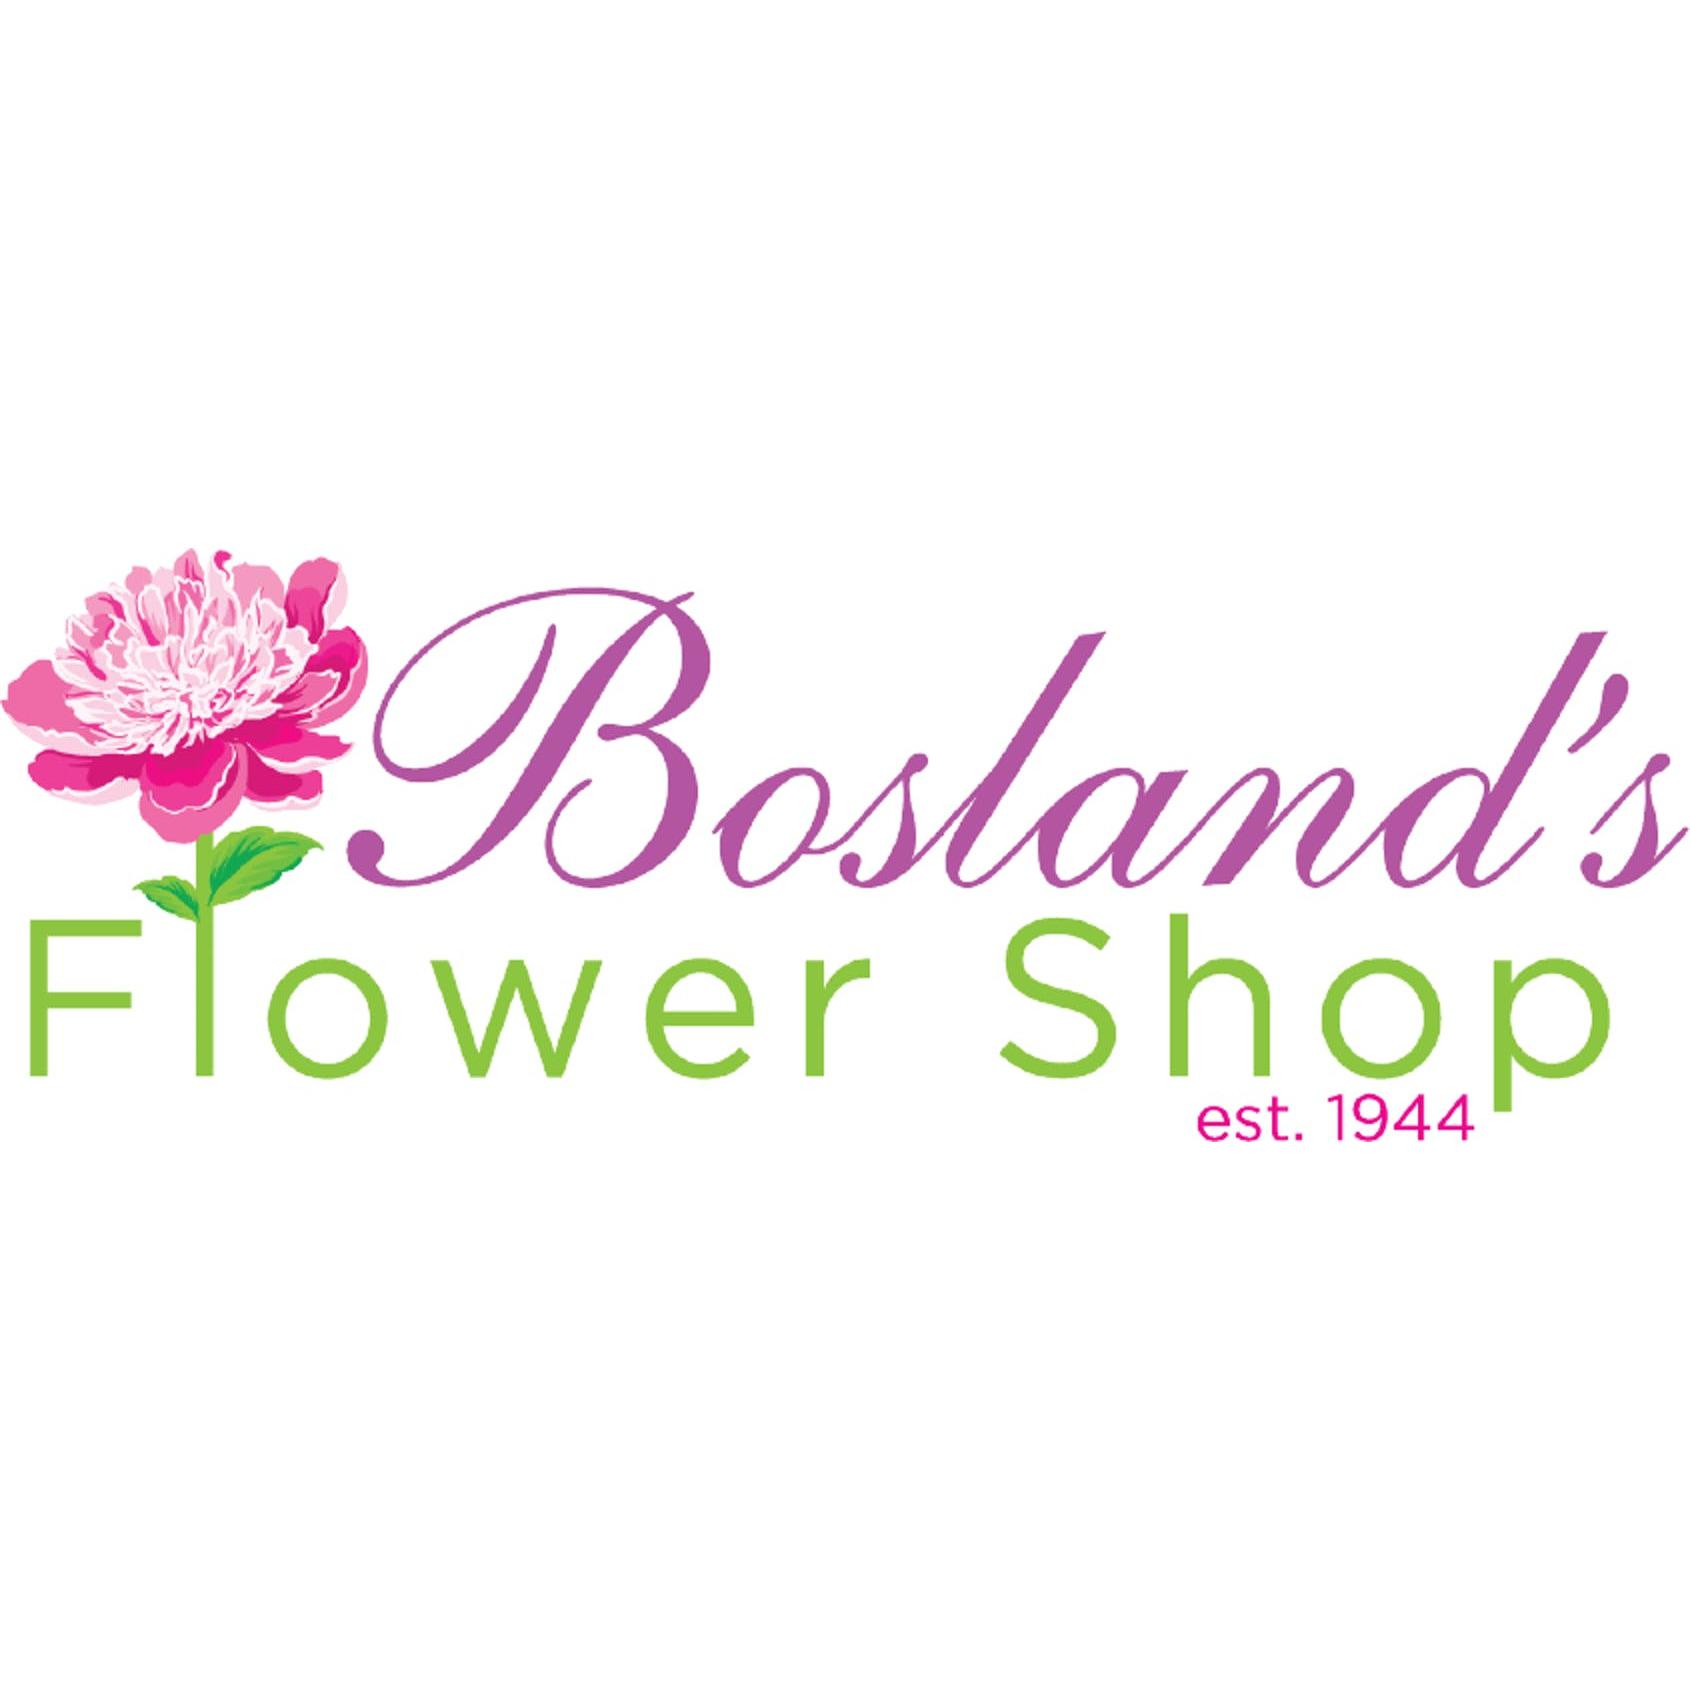 Bosland's Flower Shop proudly serves the community of Wayne, New Jersey with flowers, plants, and gi Bosland's Flower Shop Wayne (973)942-3838